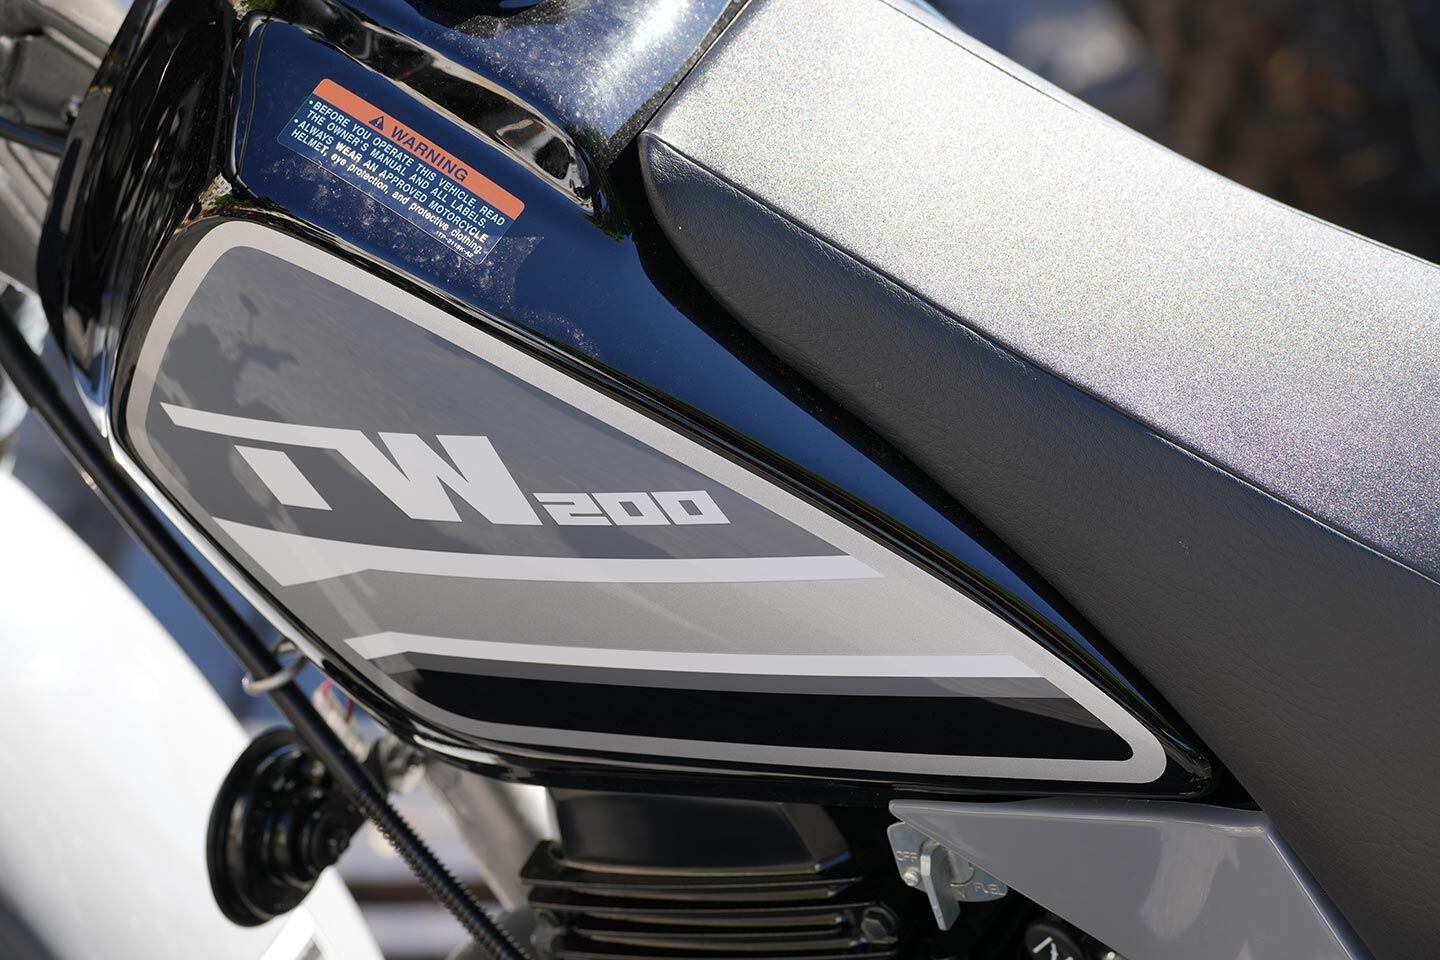 In spite of its $5,000 price tag, the TW200 features quality paint and above average build.